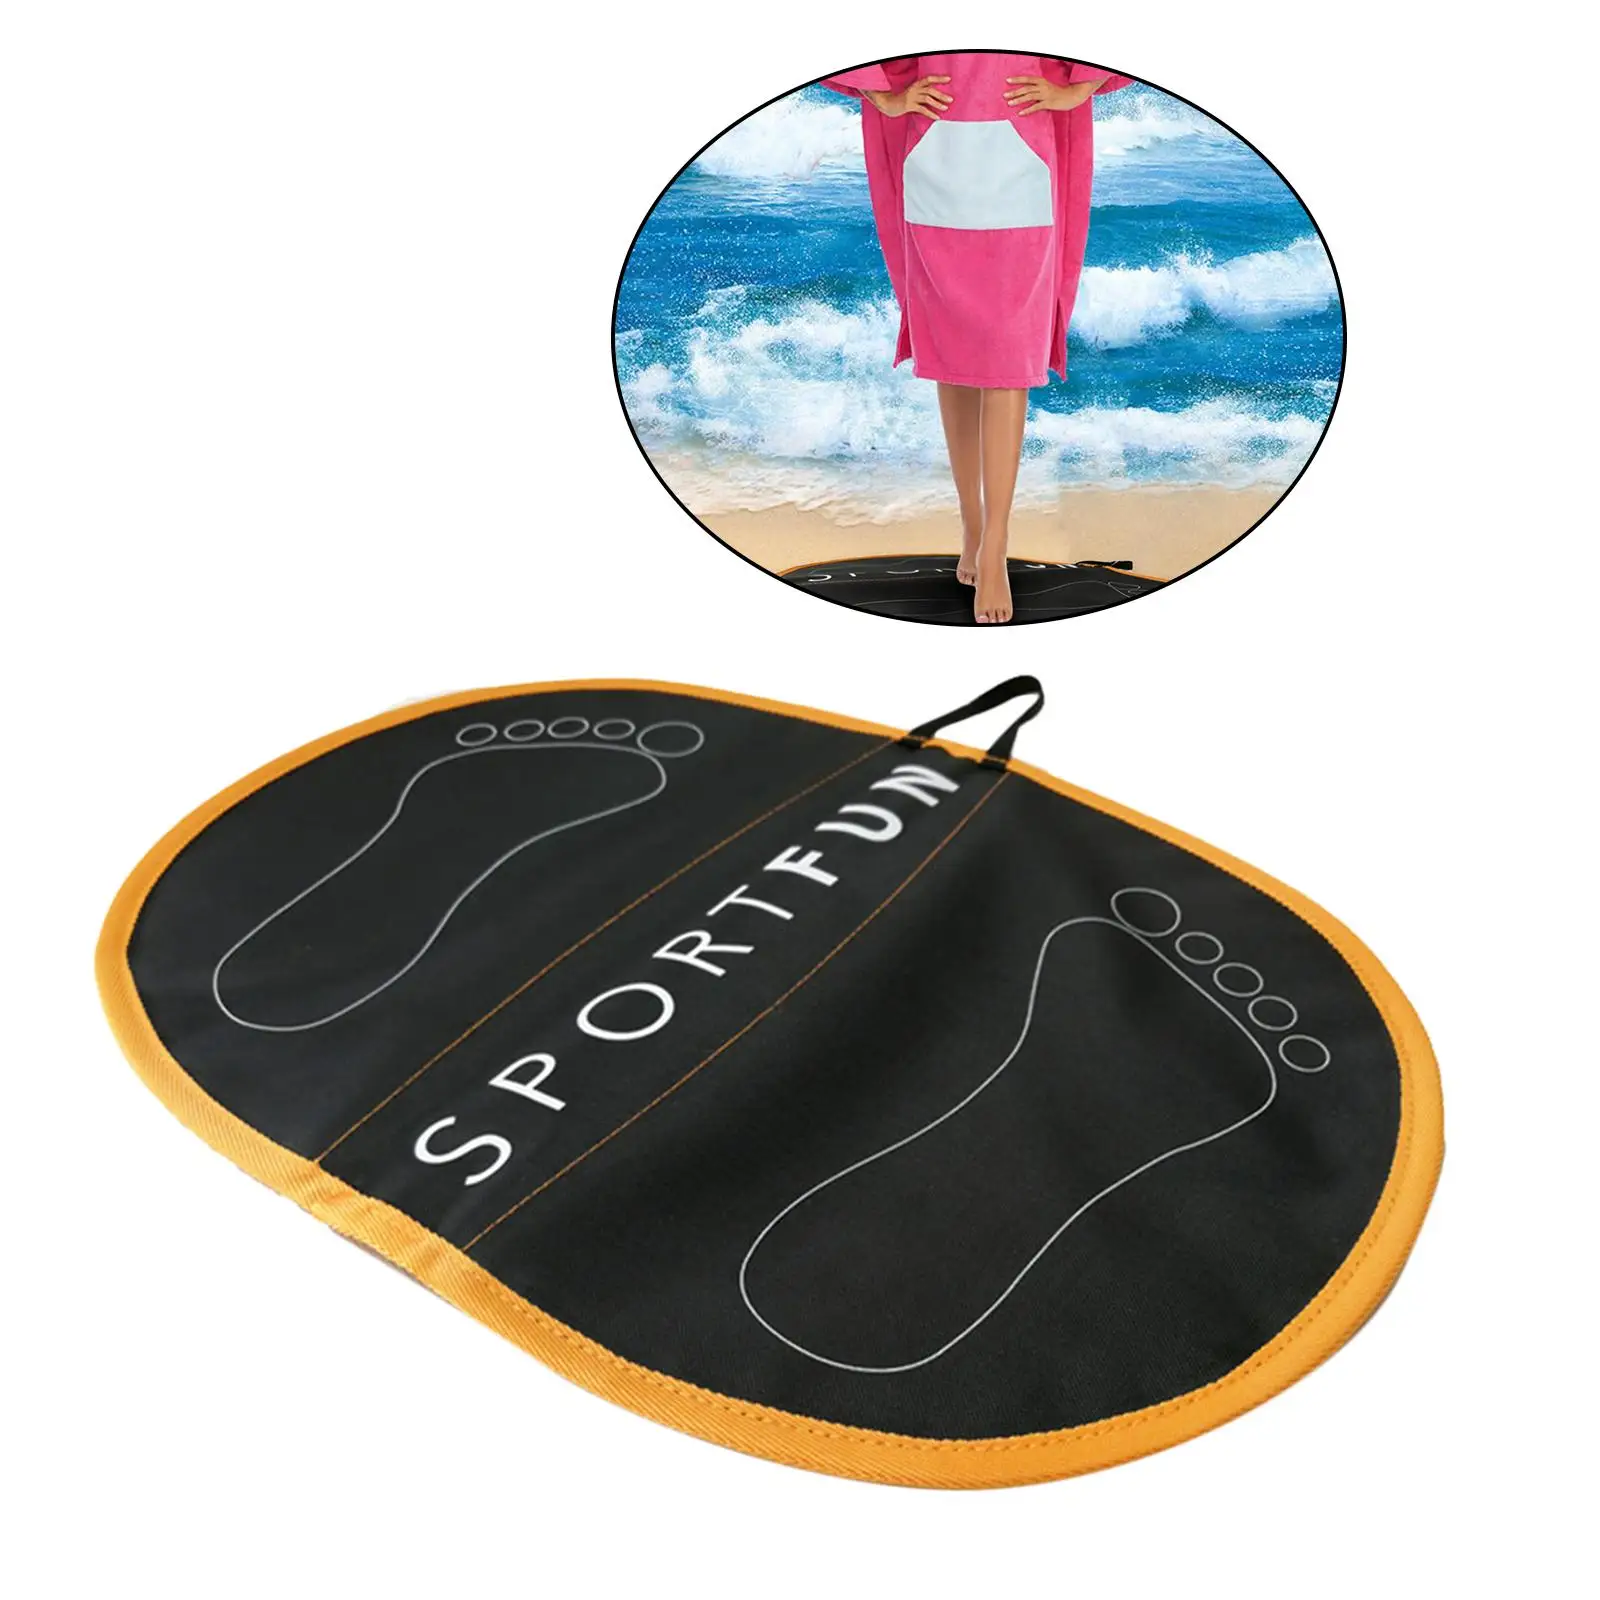 Wetsuit Changing Mat Waterproof Surfers Rafters Foot Pads Water Sports Kayaking Swimming Surfing Changing Mat Accessories